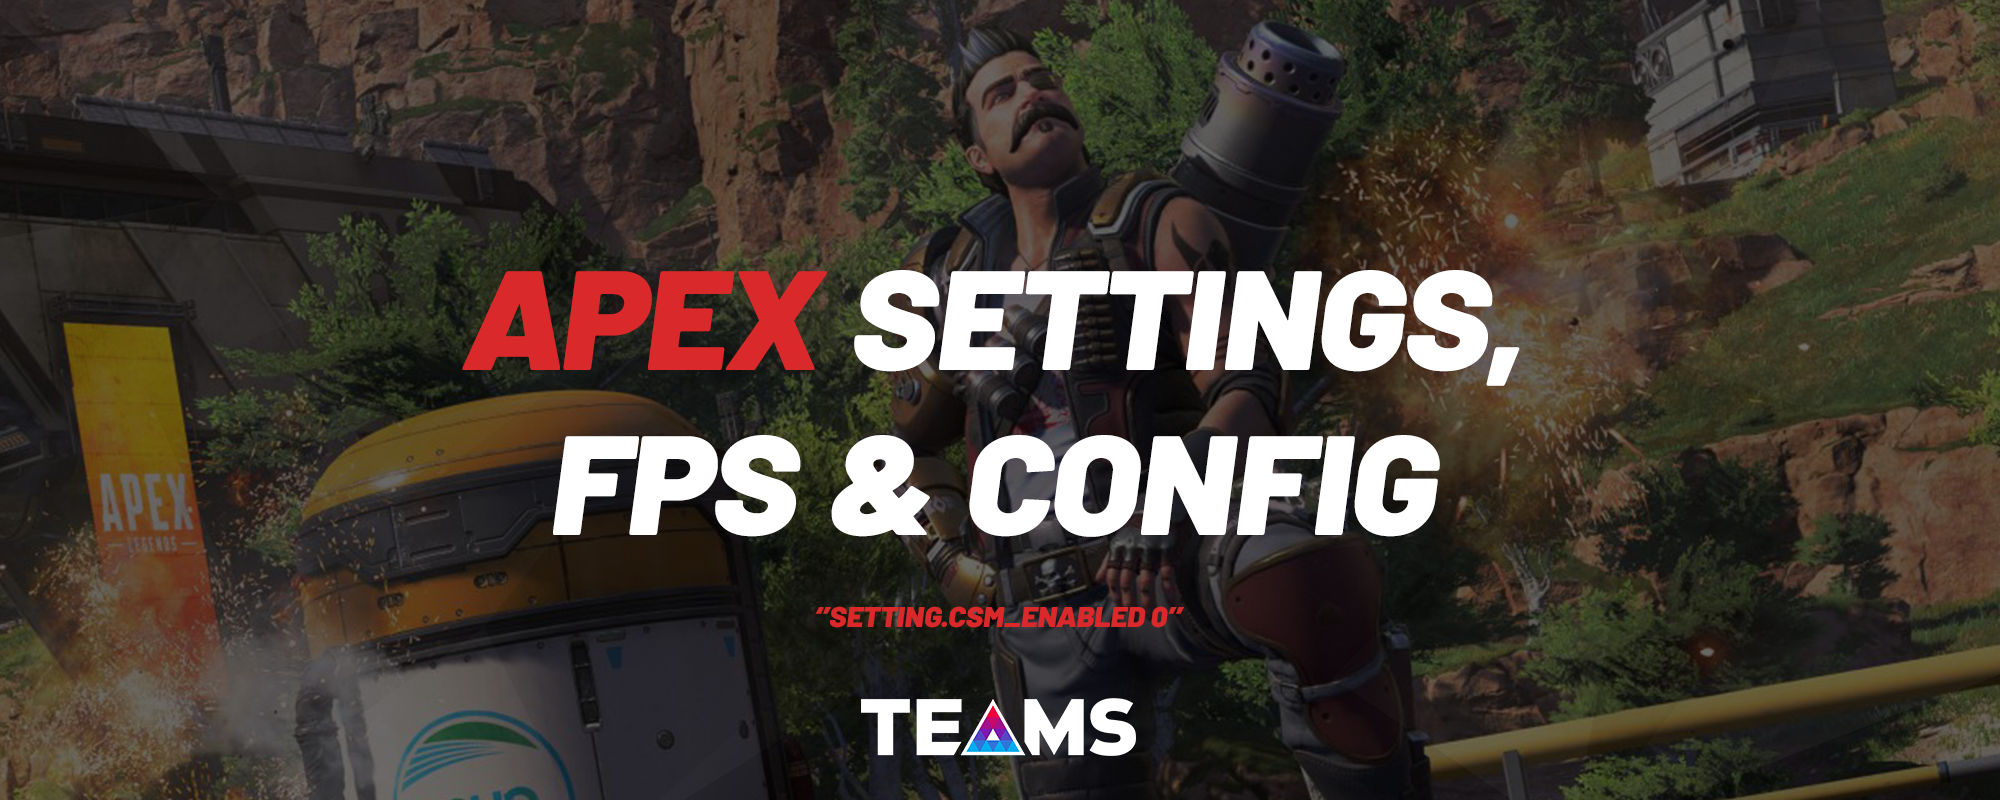 A single-player Apex Legends FPS game is in the works